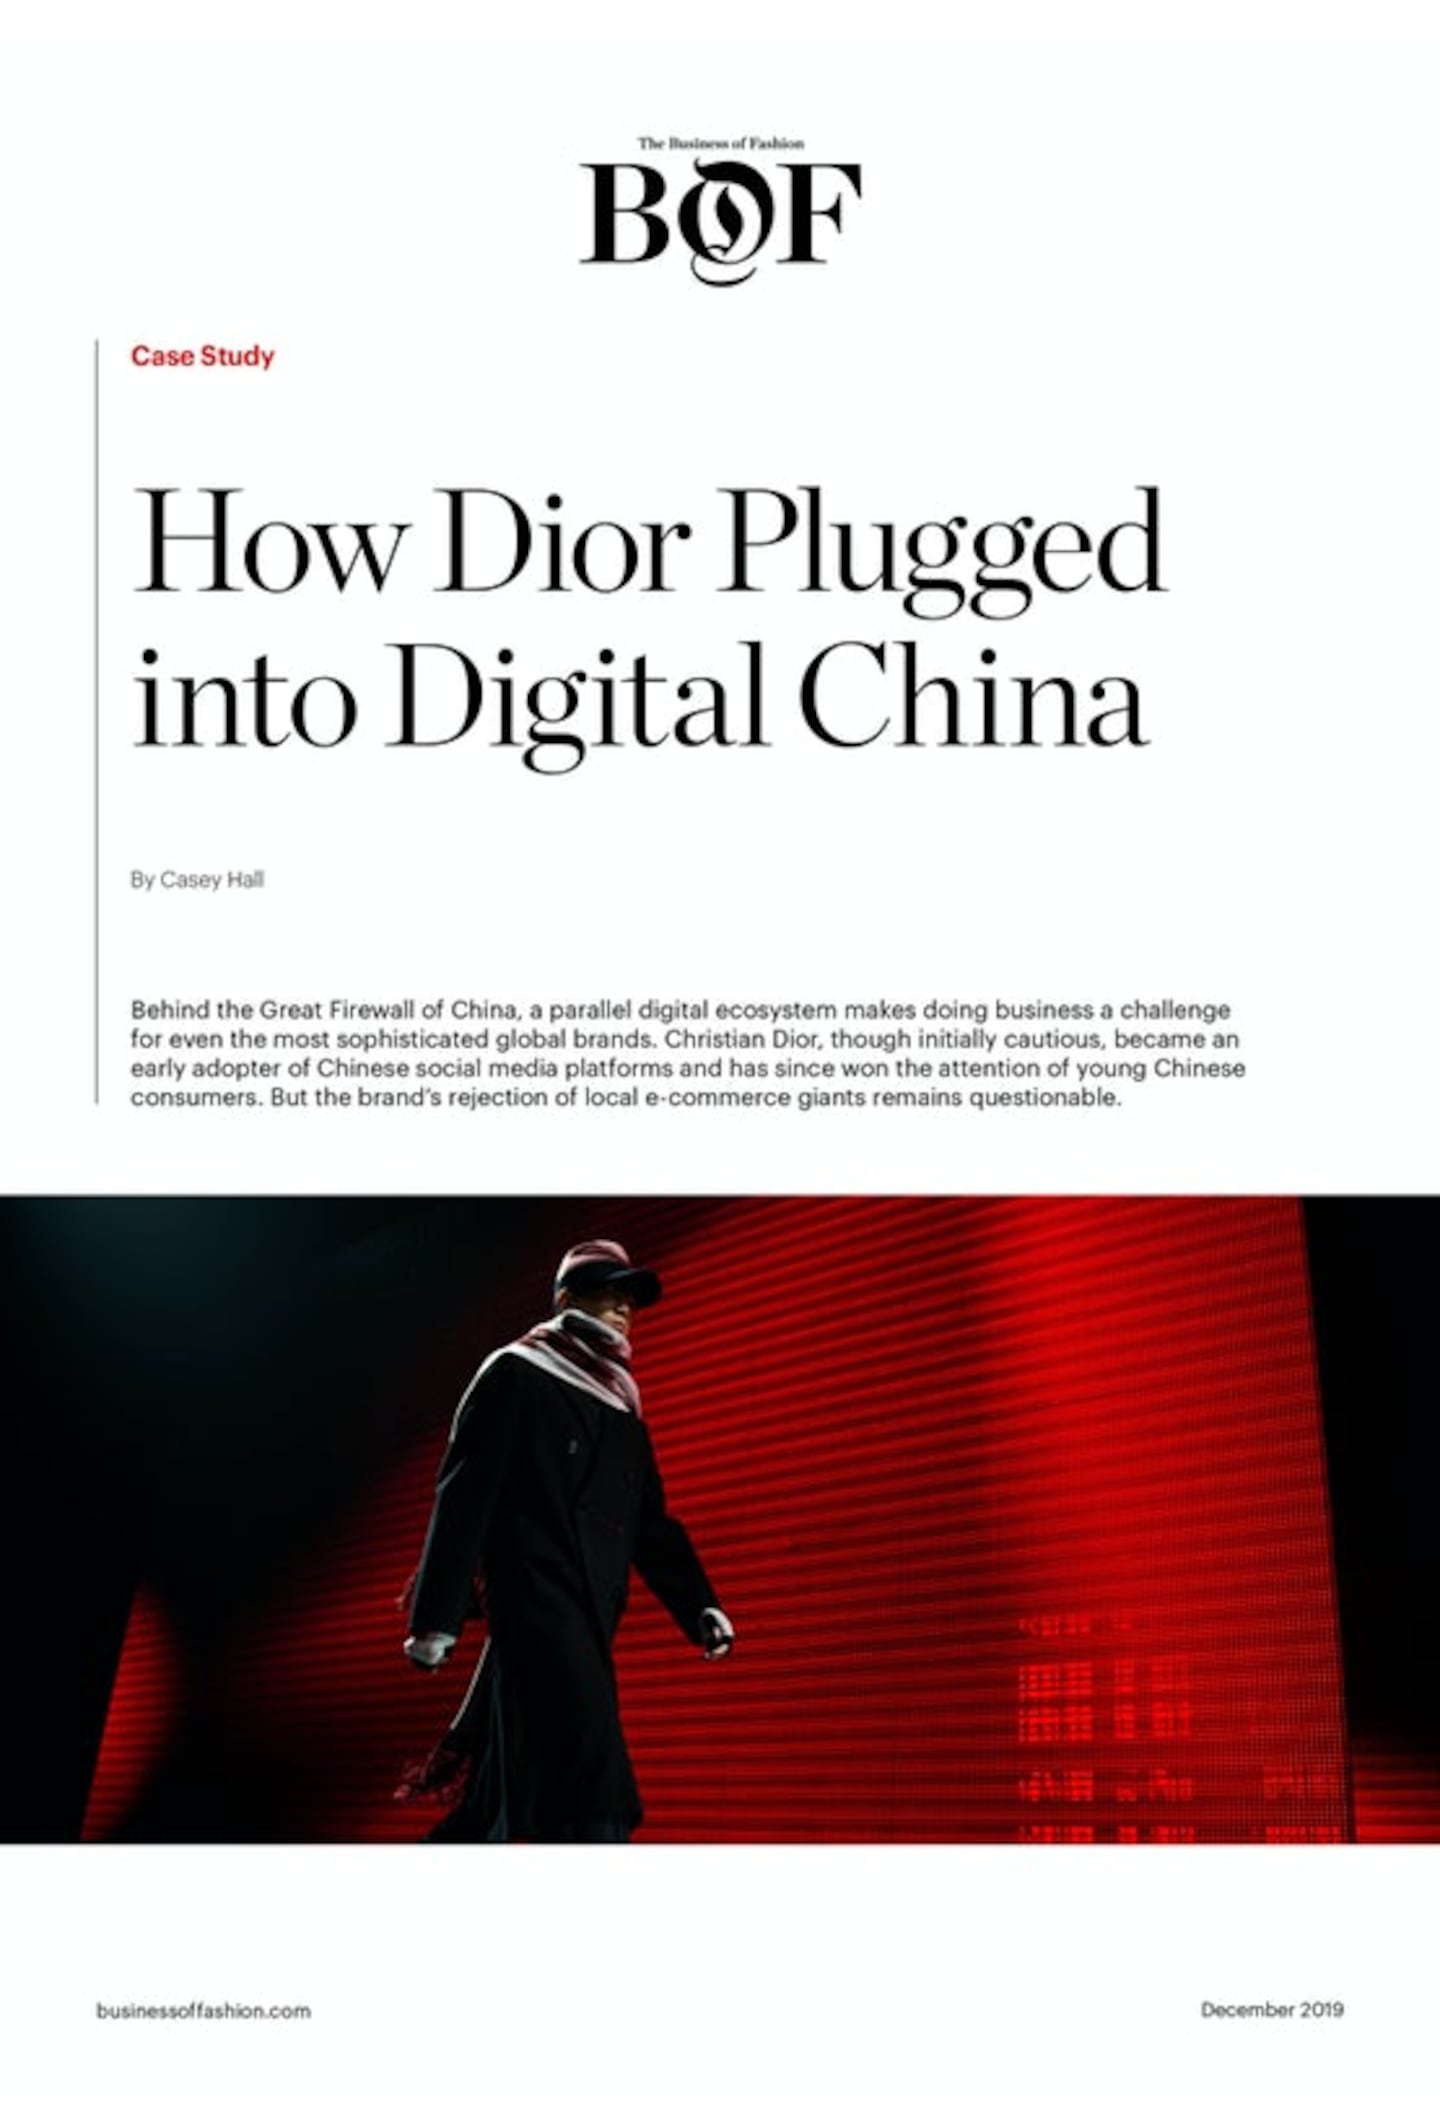 How Dior Plugged into Digital China